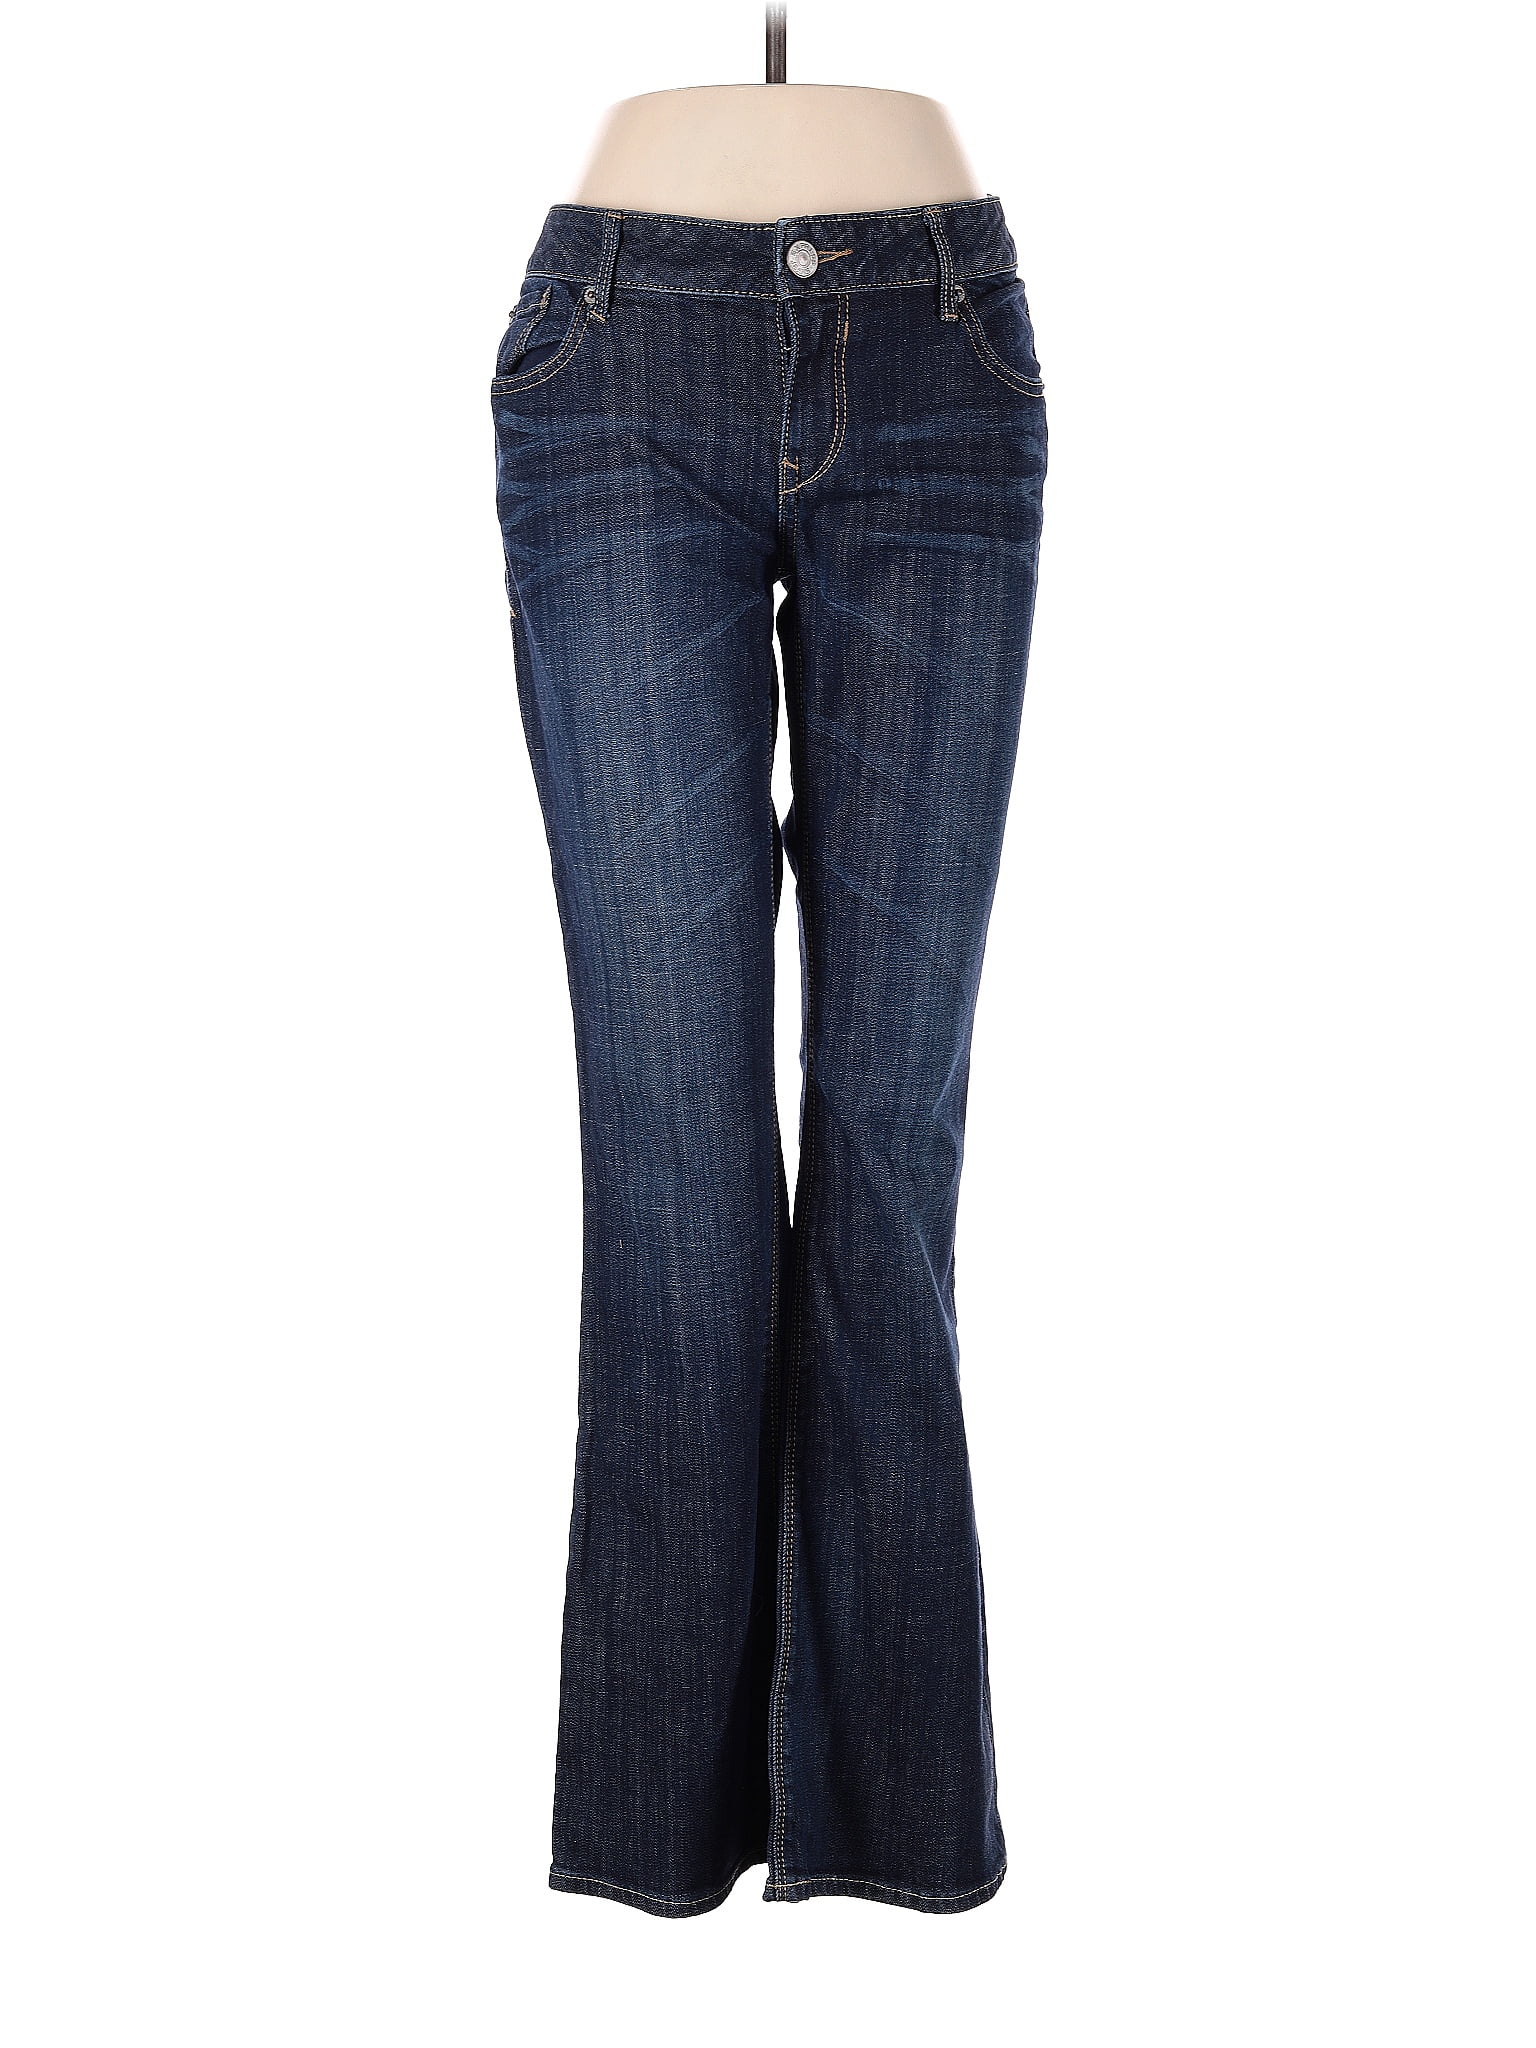 Rekucci Solid Blue Jeans Size 12 - 75% off